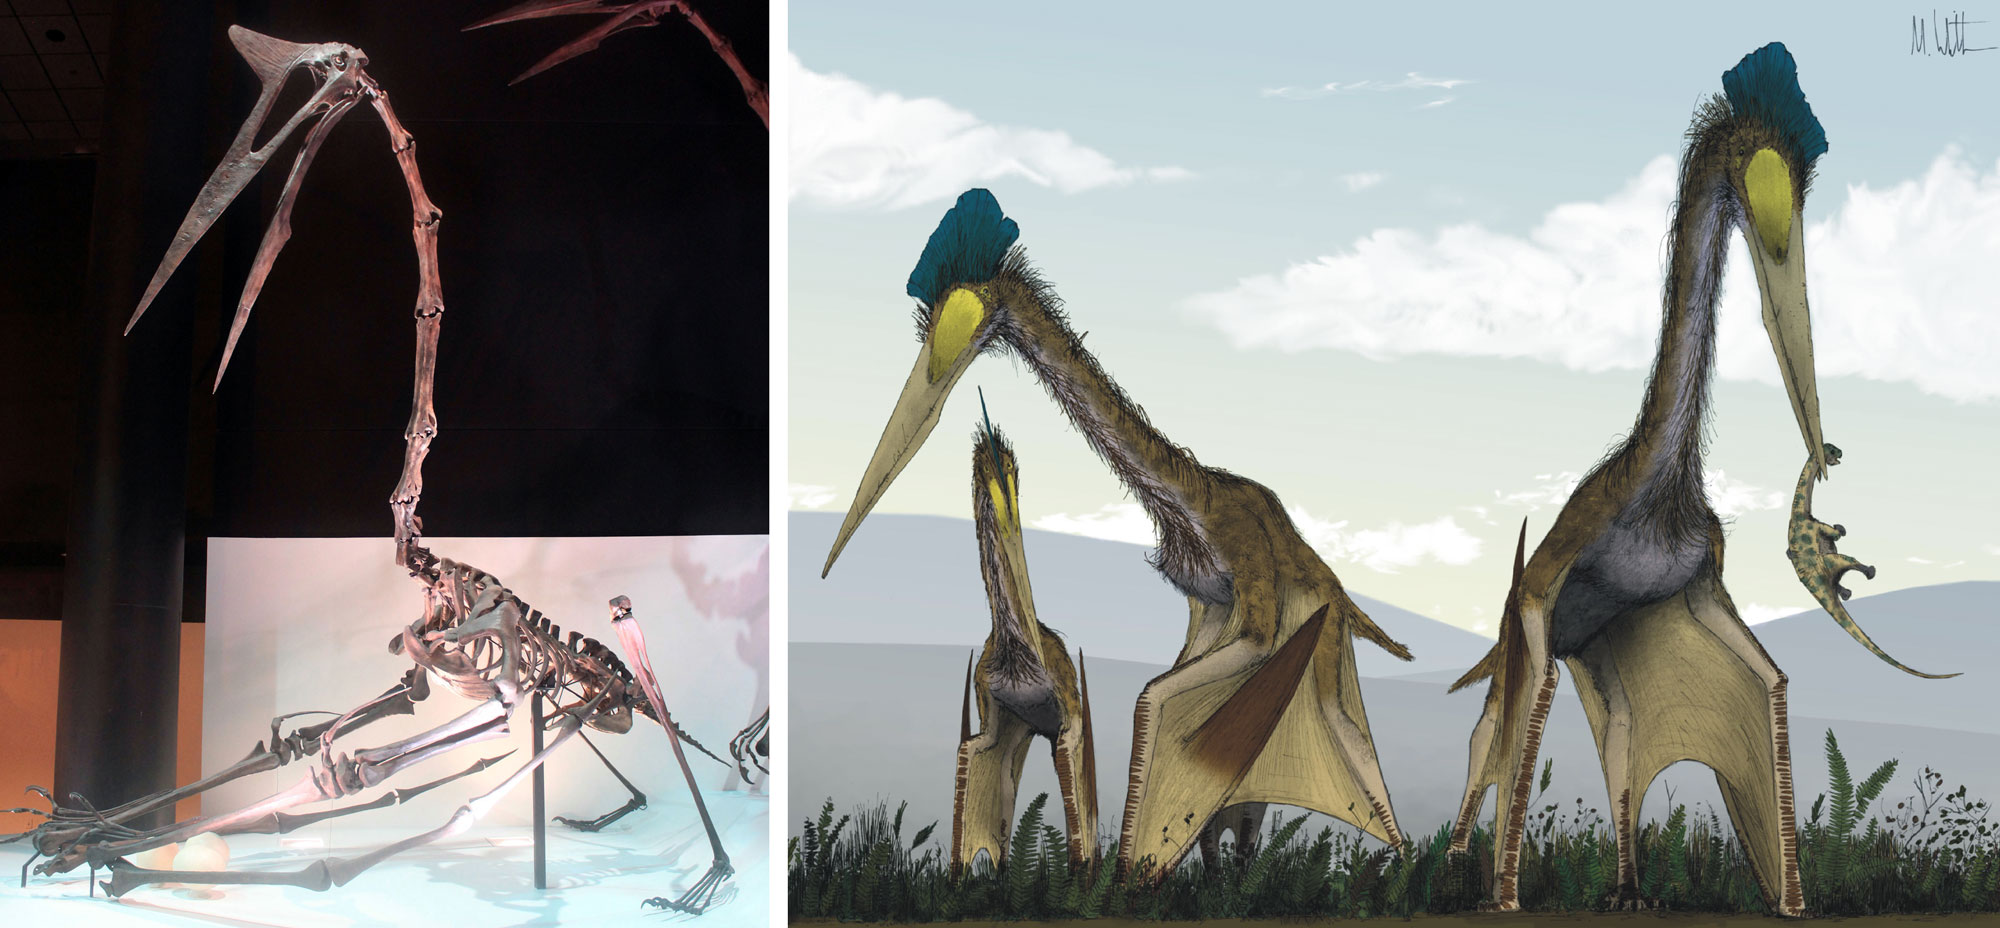 2-Panel figure of the giant pterosaur Quetzocoatlus. Panel 1: Photo of a reconstructed skeleton from an exhibit. Panel 2: Illustration of 3 living animals foraging for food on the ground.